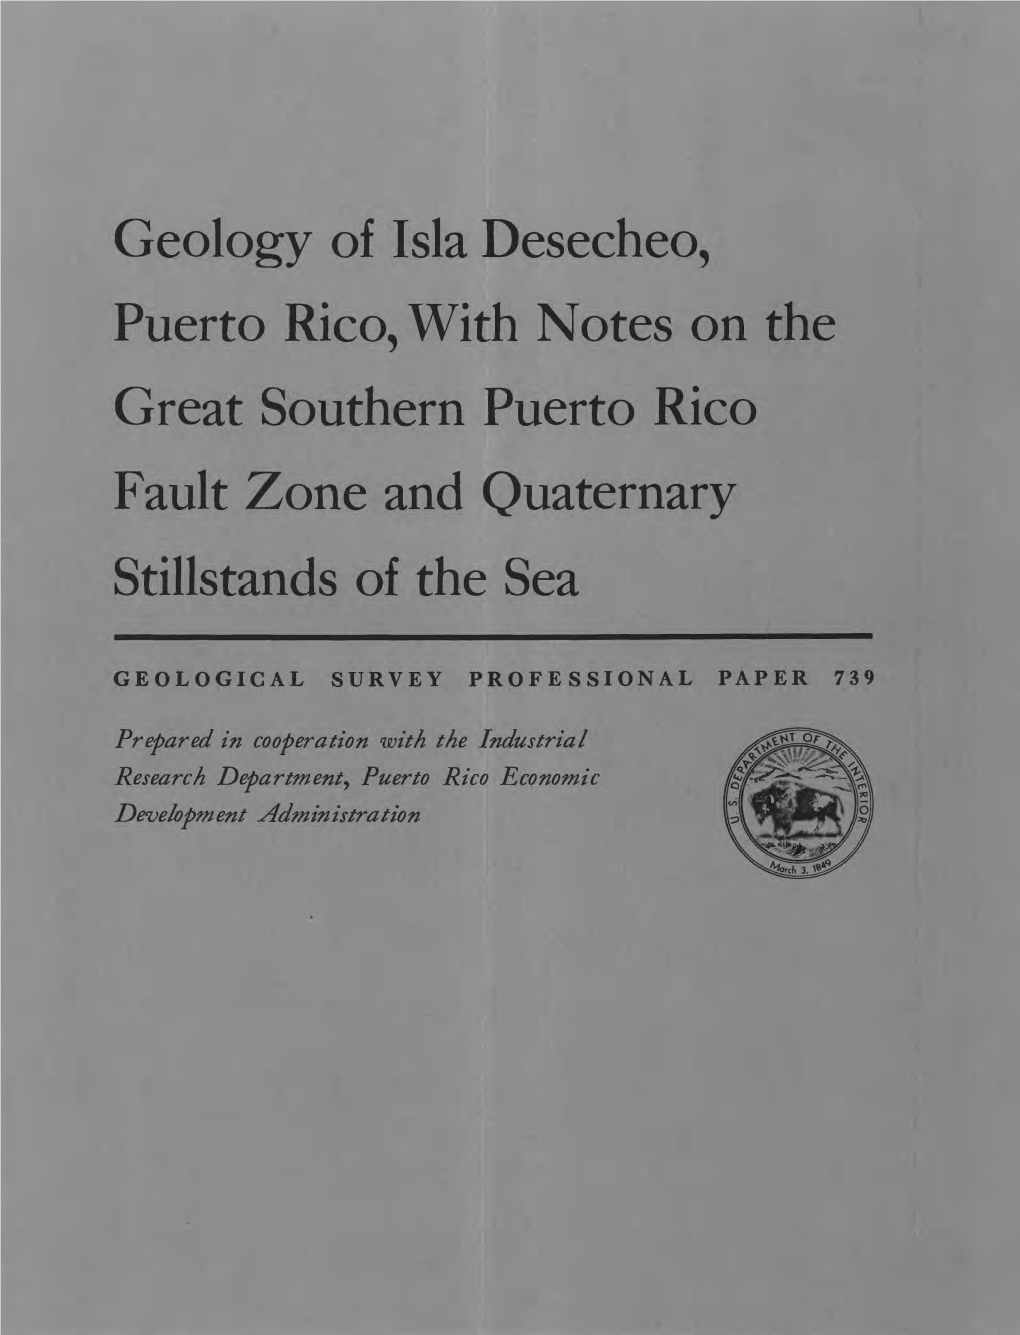 Geology of Isla Desecheo, Puerto Rico, with Notes on the Great Southern Puerto Rico Fault Zone and Quaternary Stillstands of the Sea